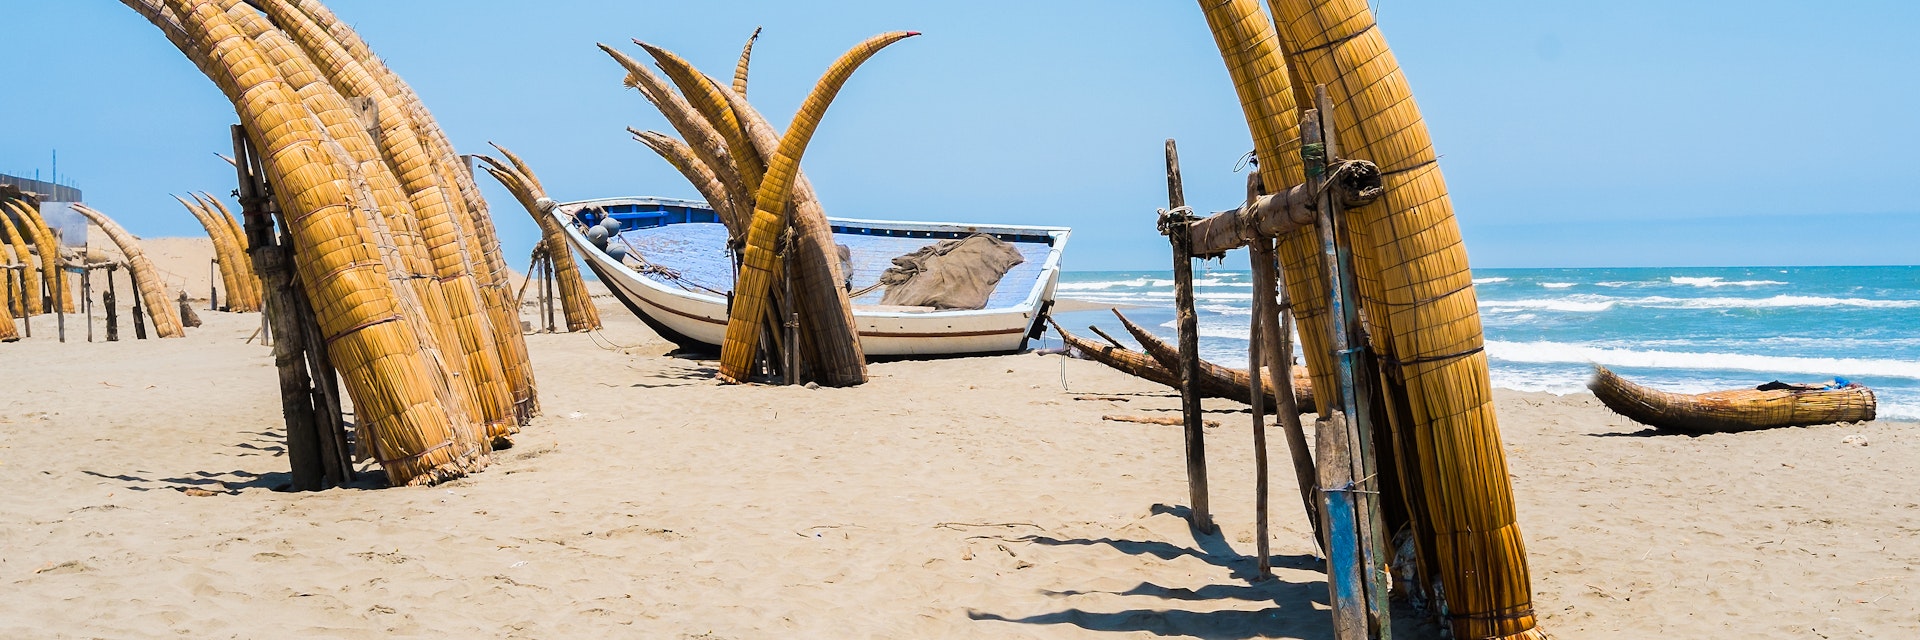 Typical fishing boat Caballitos on the beach of Pimentel, Chiclayo, Peru